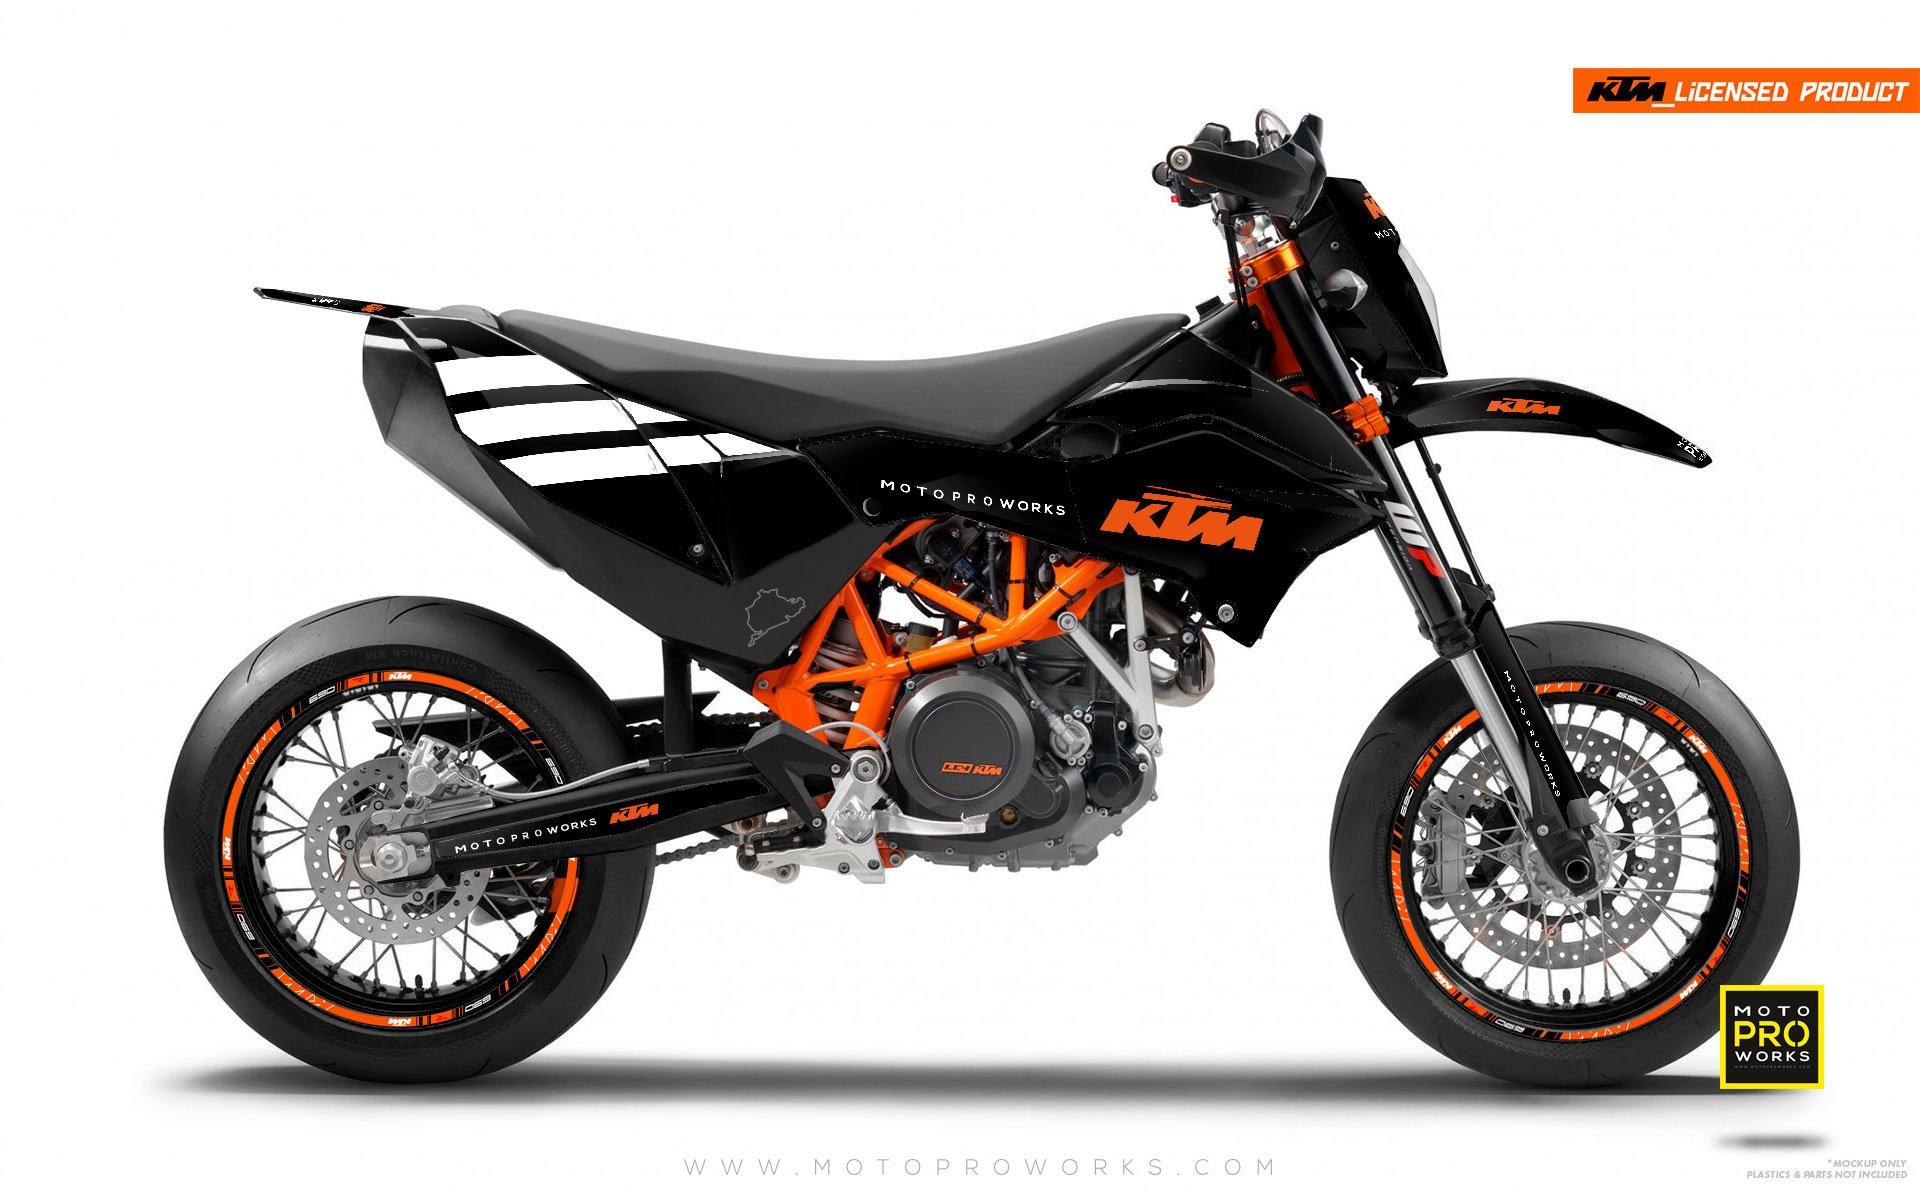 KTM GRAPHIC KIT - "FLAT ICON" (black) - MotoProWorks | Decals and Bike Graphic kit